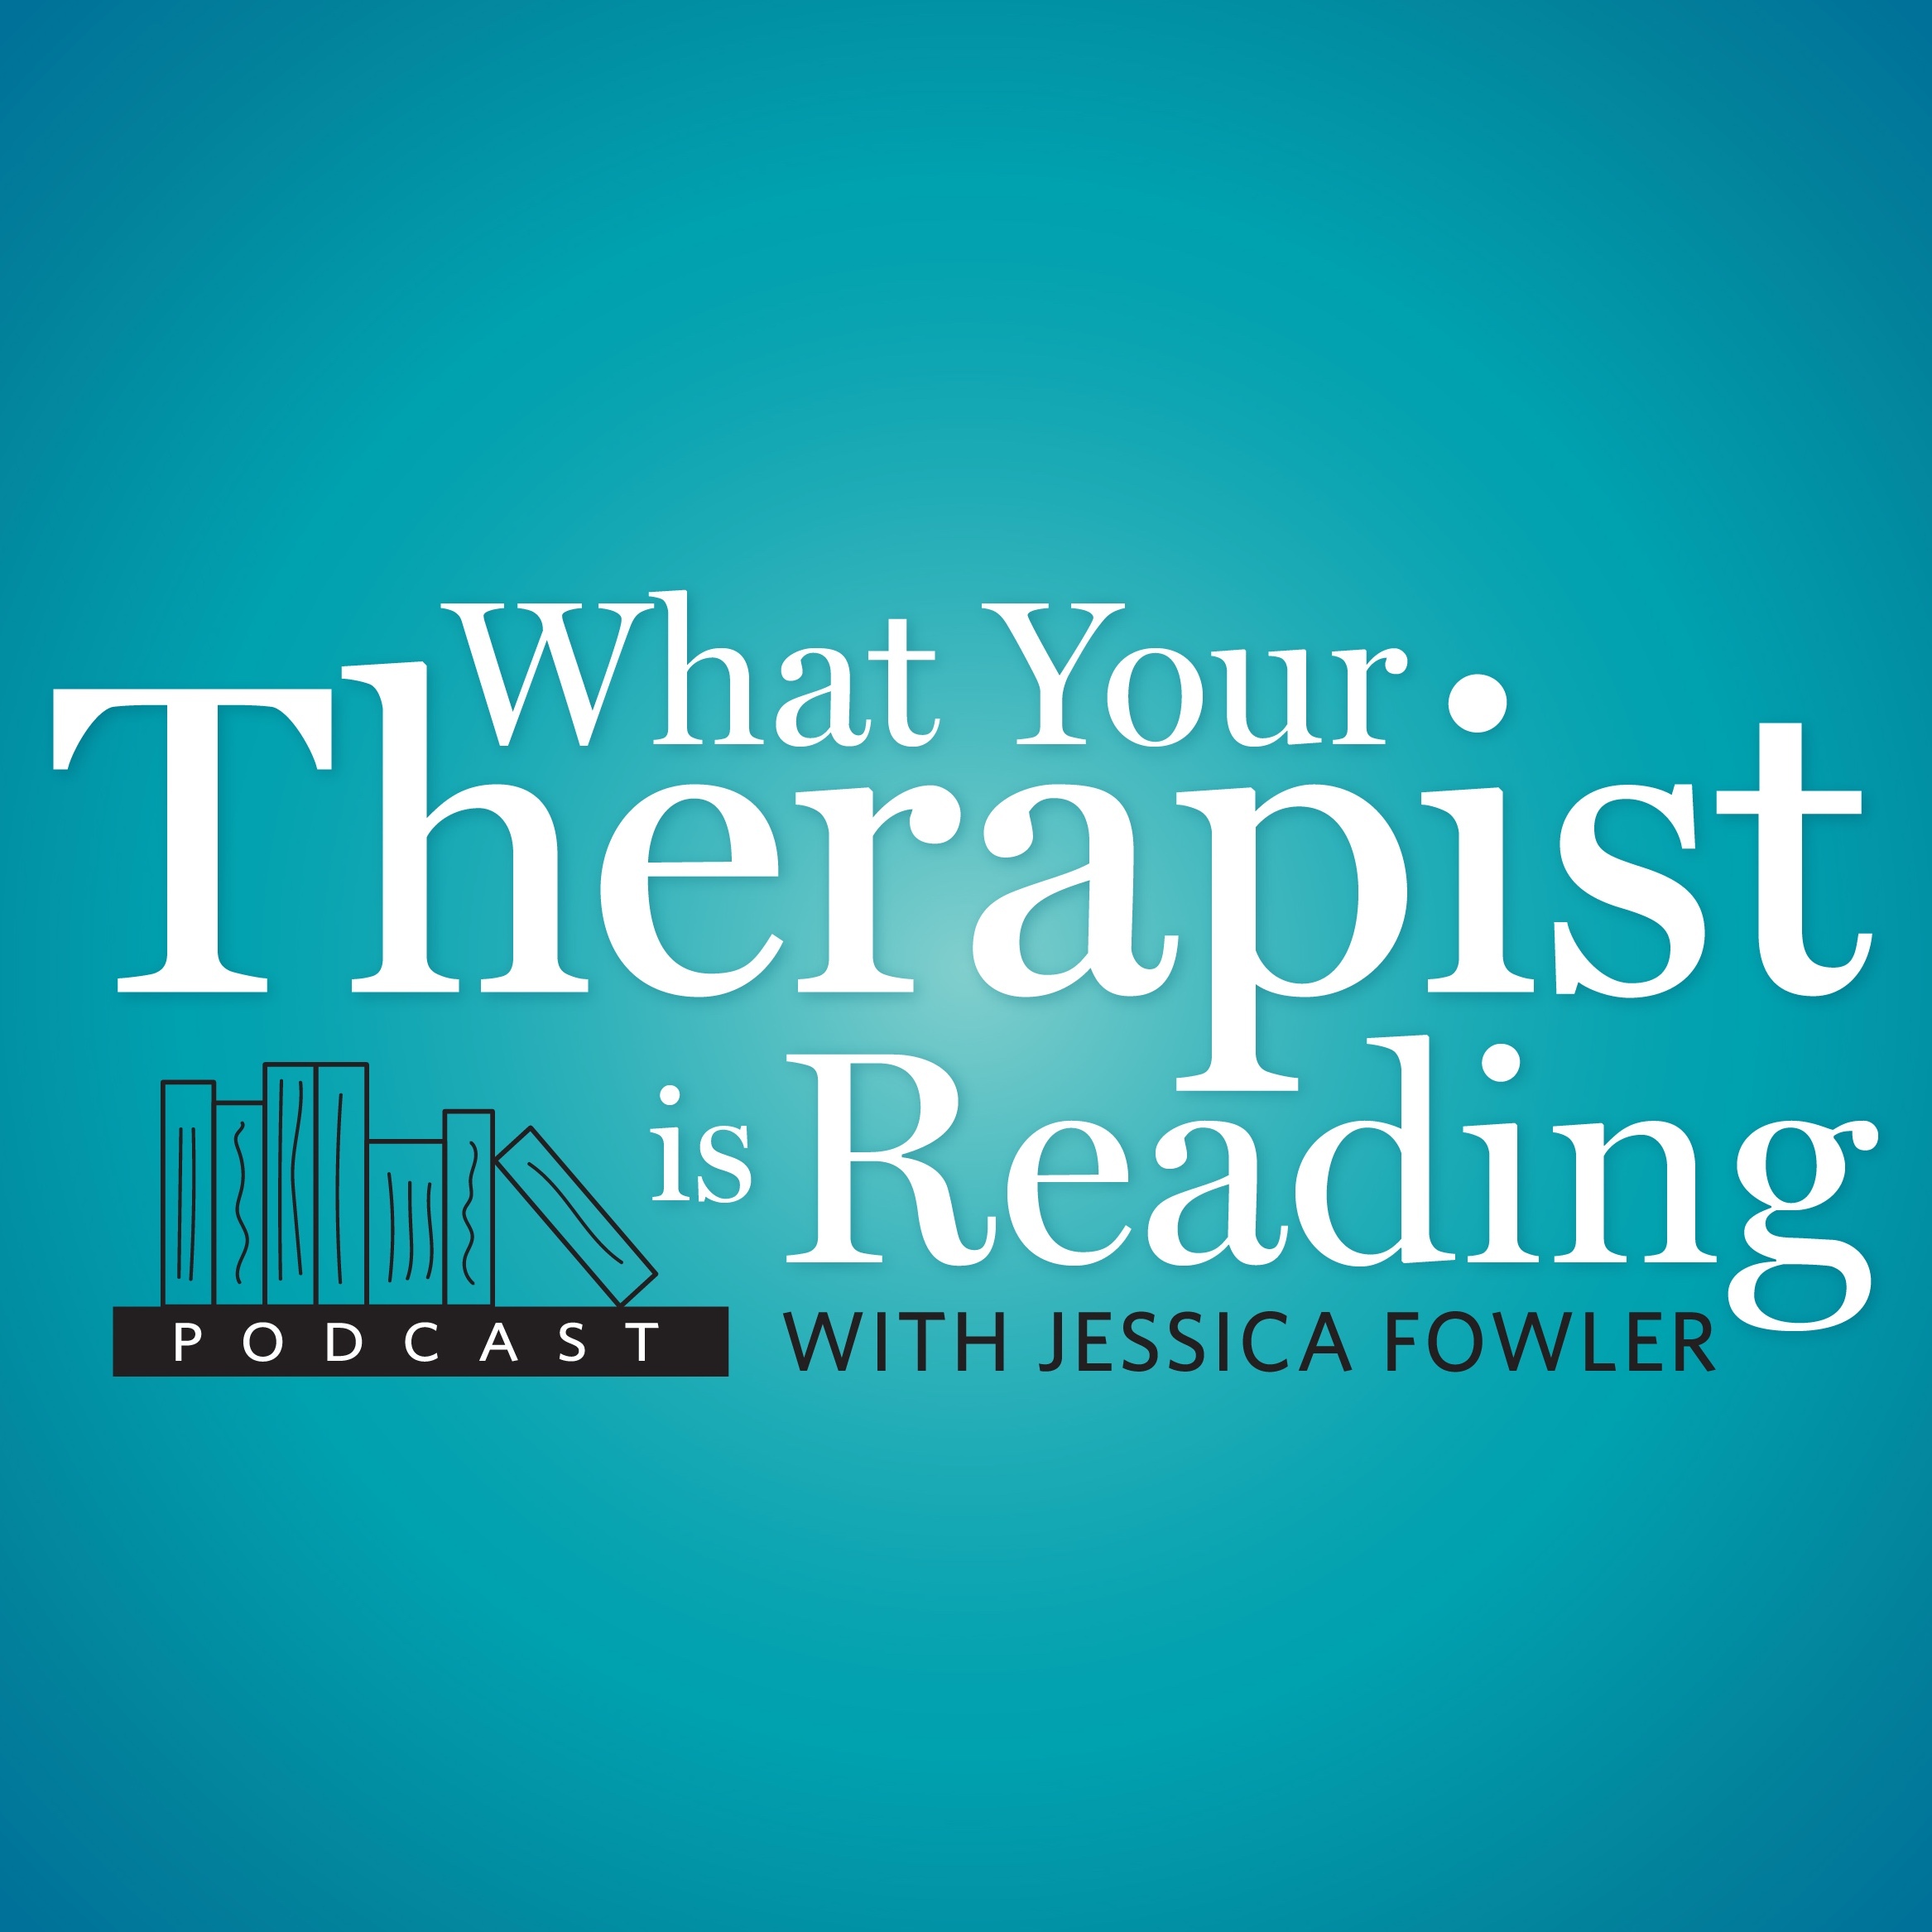 Cover logo for the "What Your Therapist is Reading" podcast